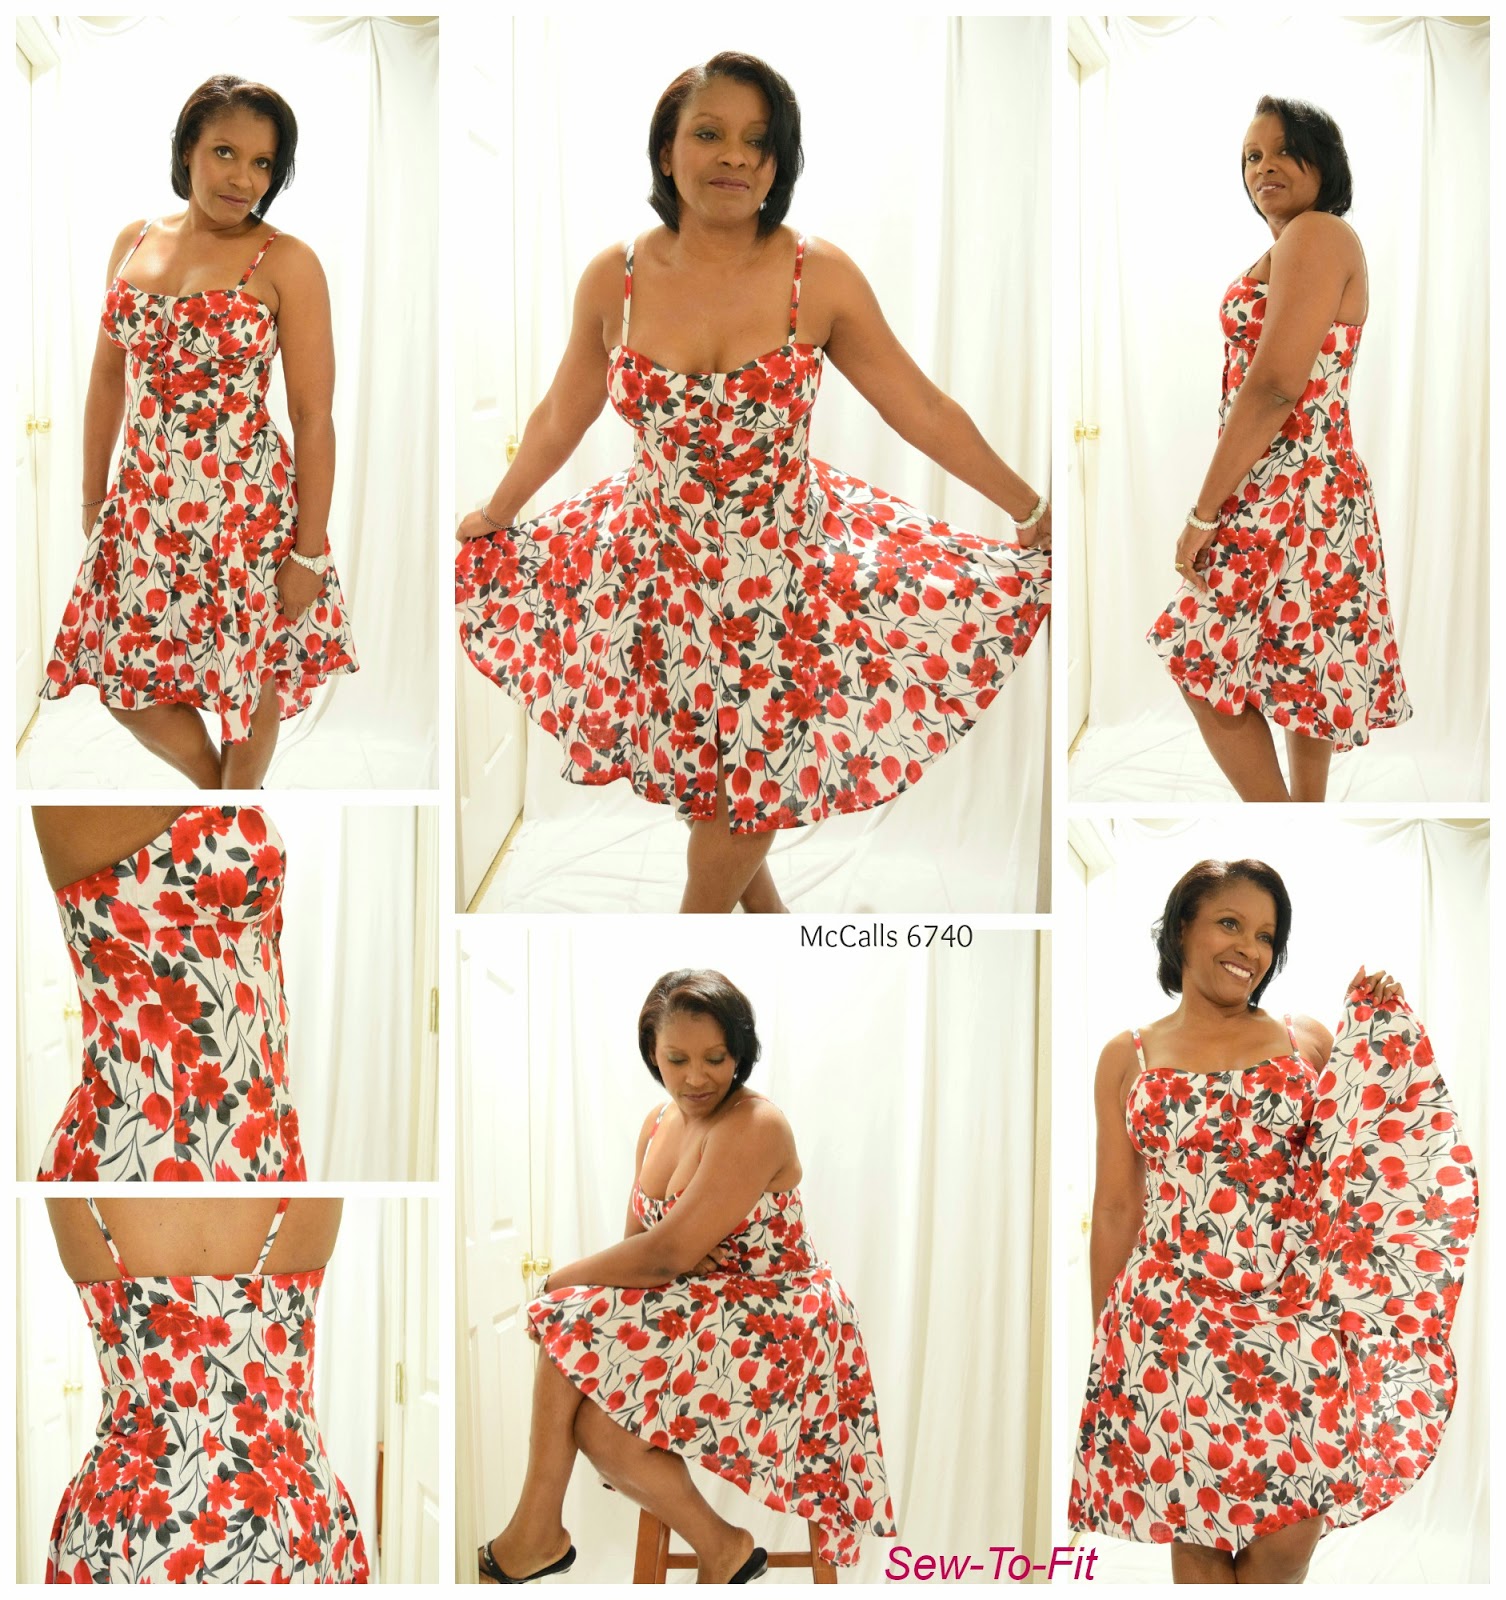 Sew-To-Fit by A.D. Lynn: Flower Power...McCalls 6740 Pattern Review